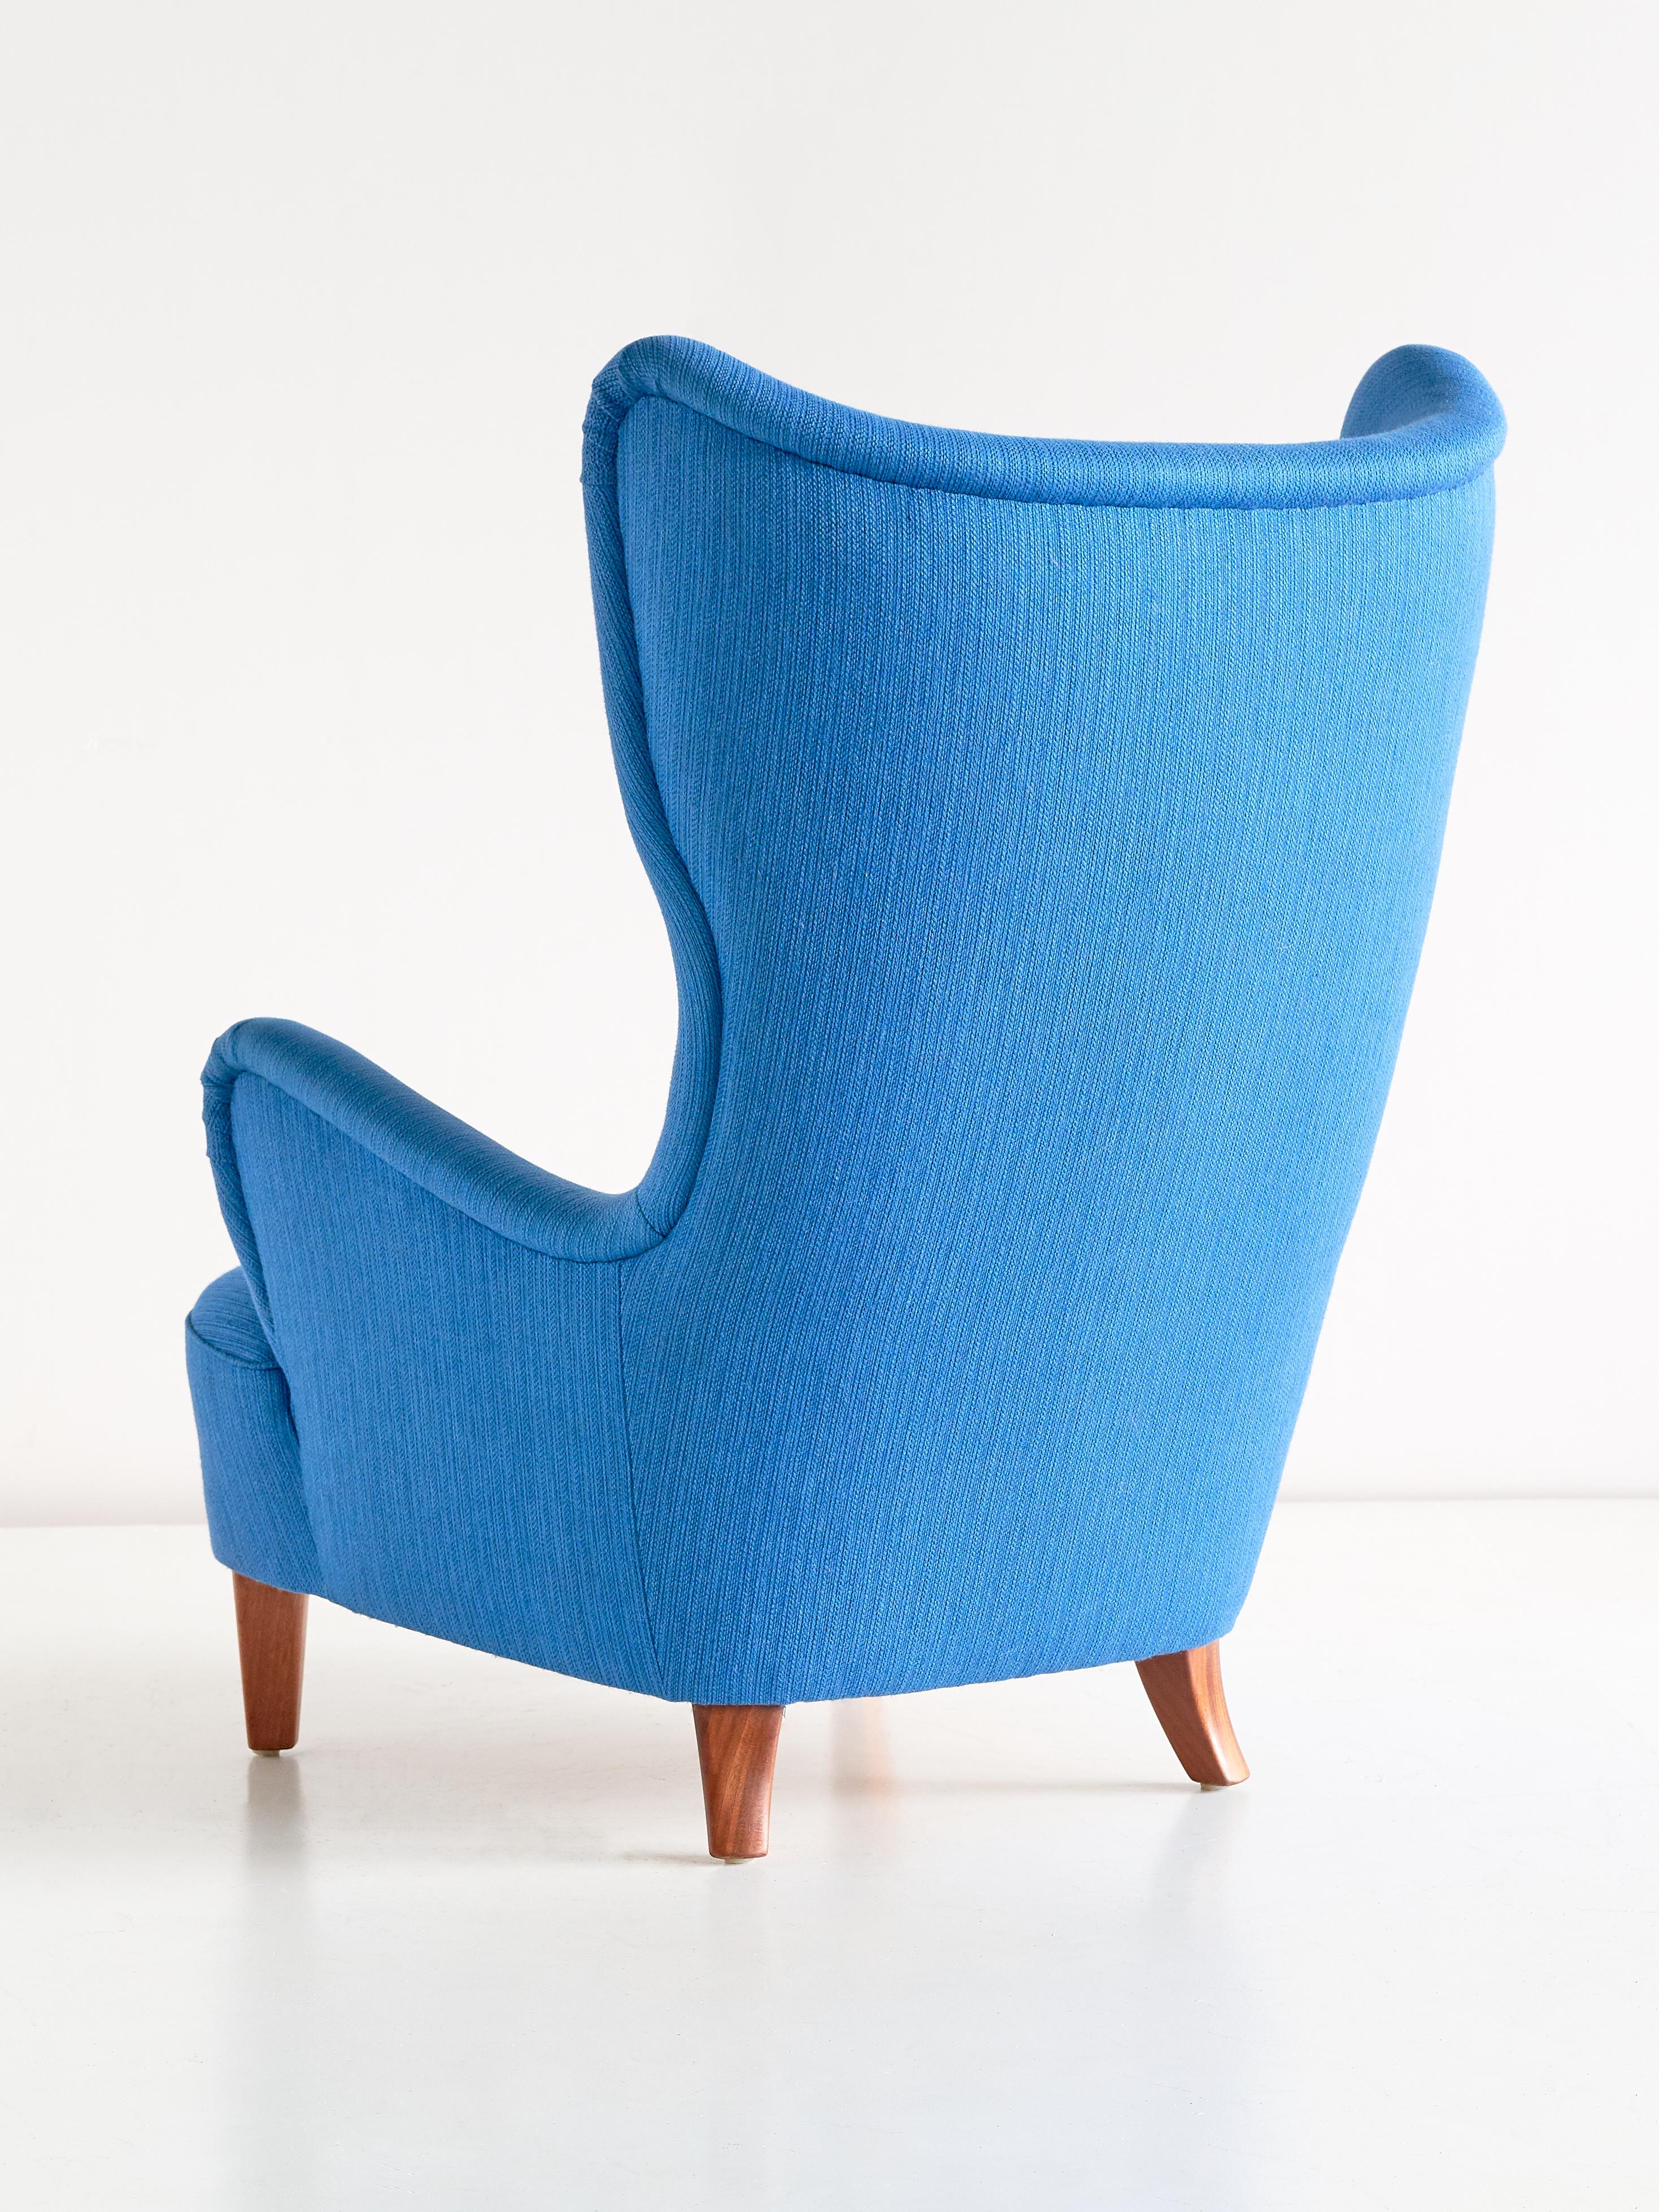 Swedish Arne Färnrot Wingback Chair in Blue Wool Fabric and Mahogany, Sweden, Late 1940s